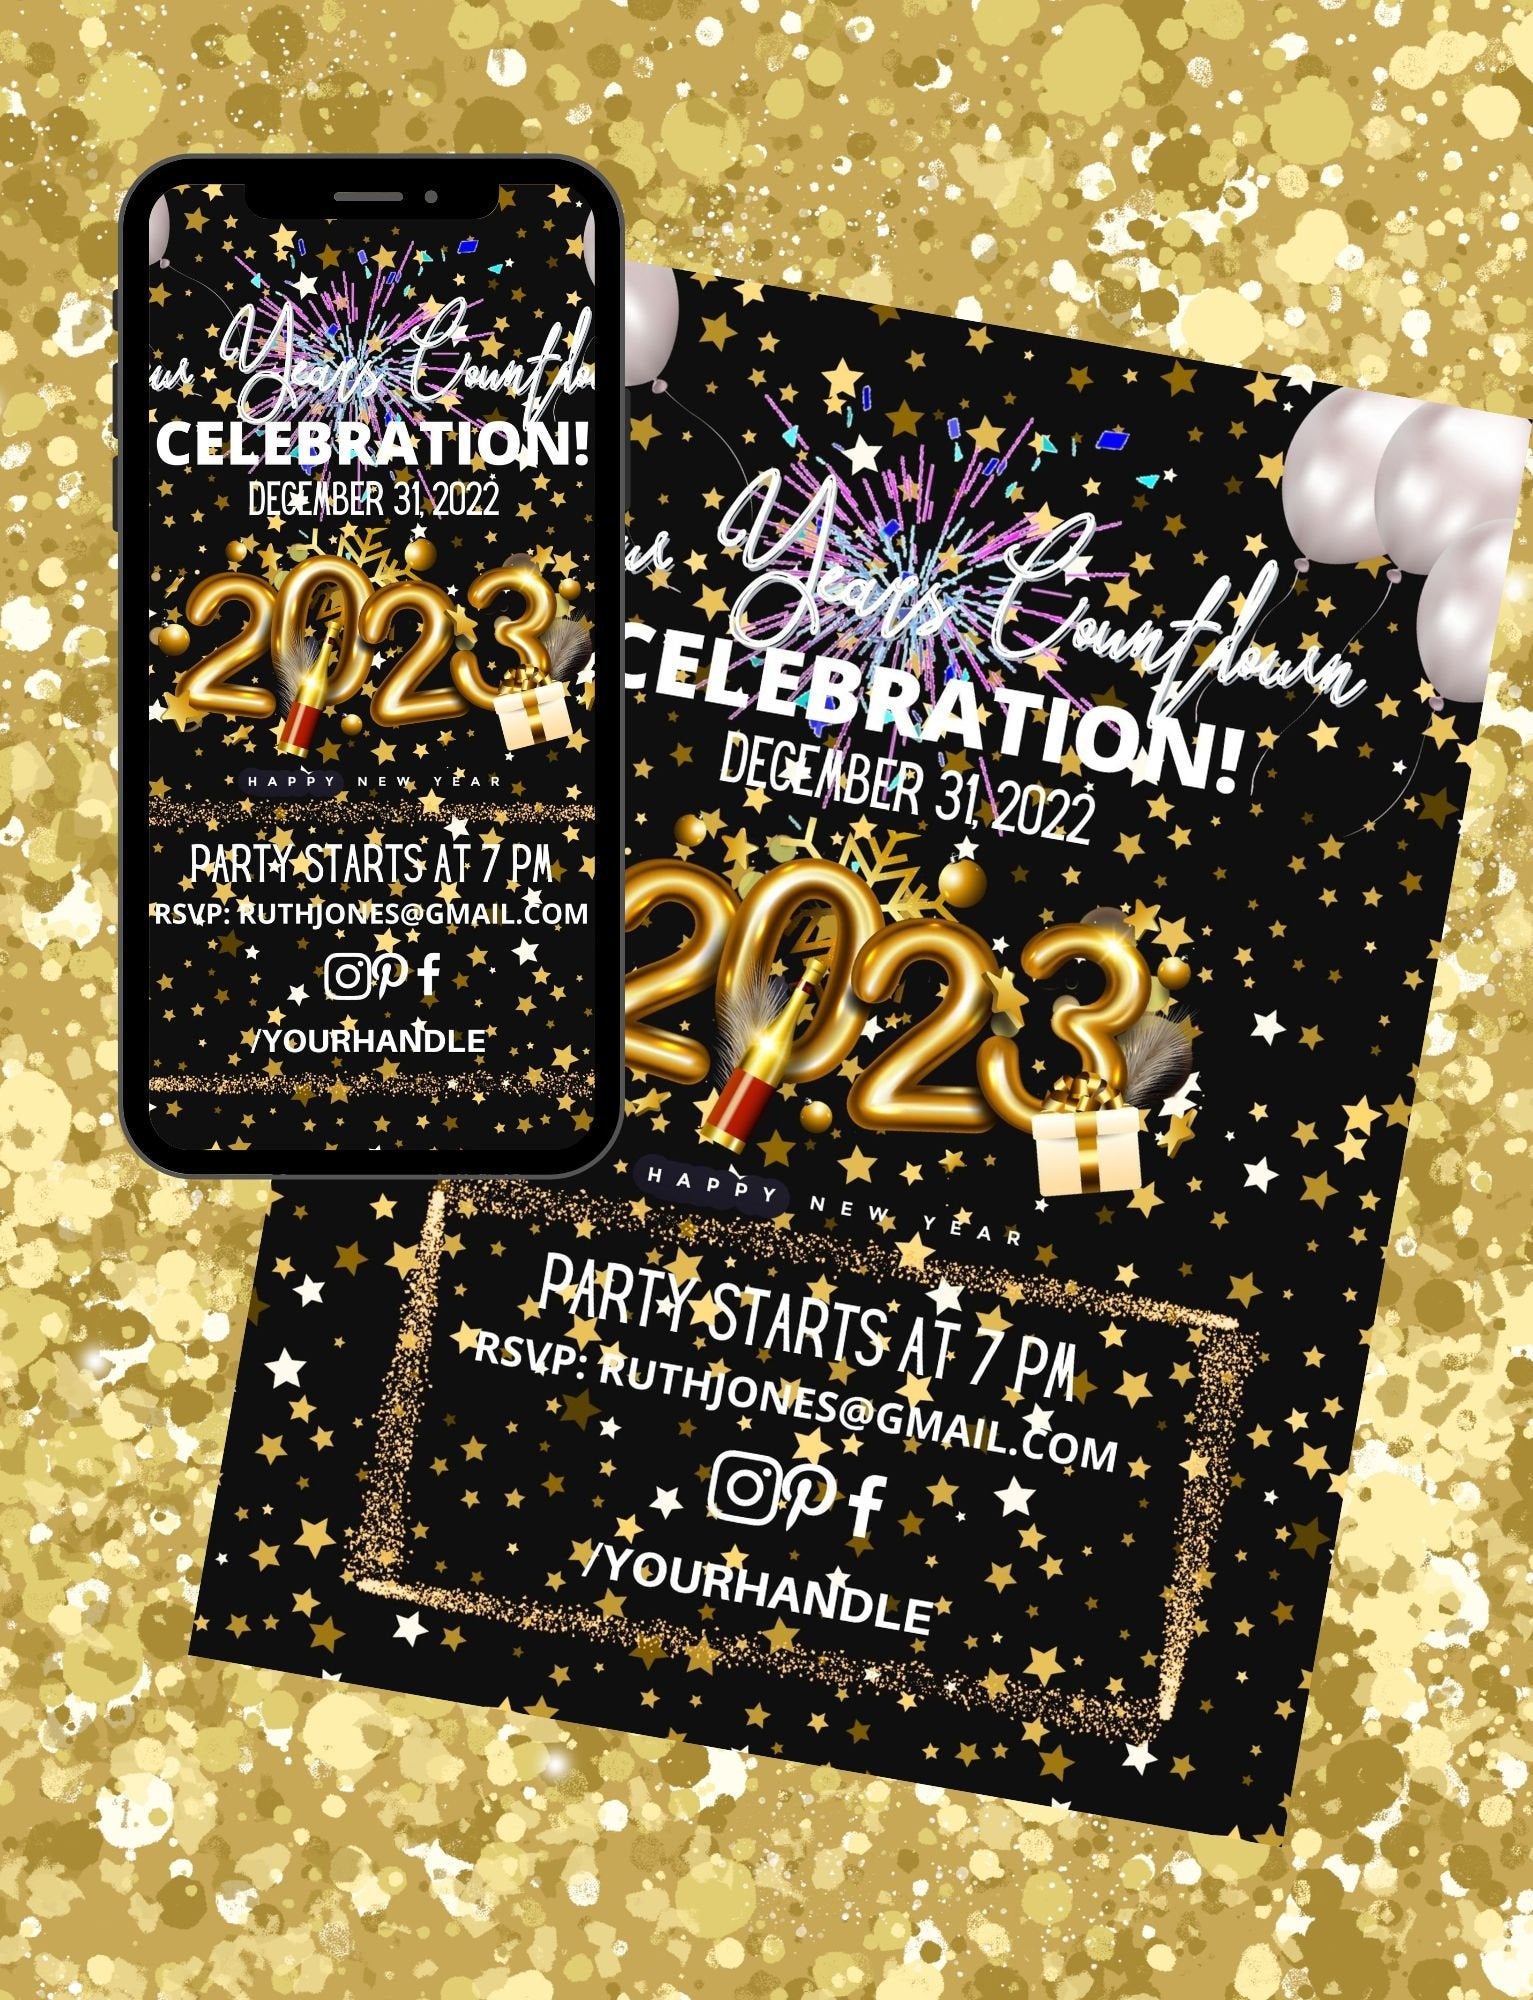 Animated MP4  New Years Virtual Invite Instagram, Social Media Post Digital E-Vite with sound Robotic Countdown also Printable